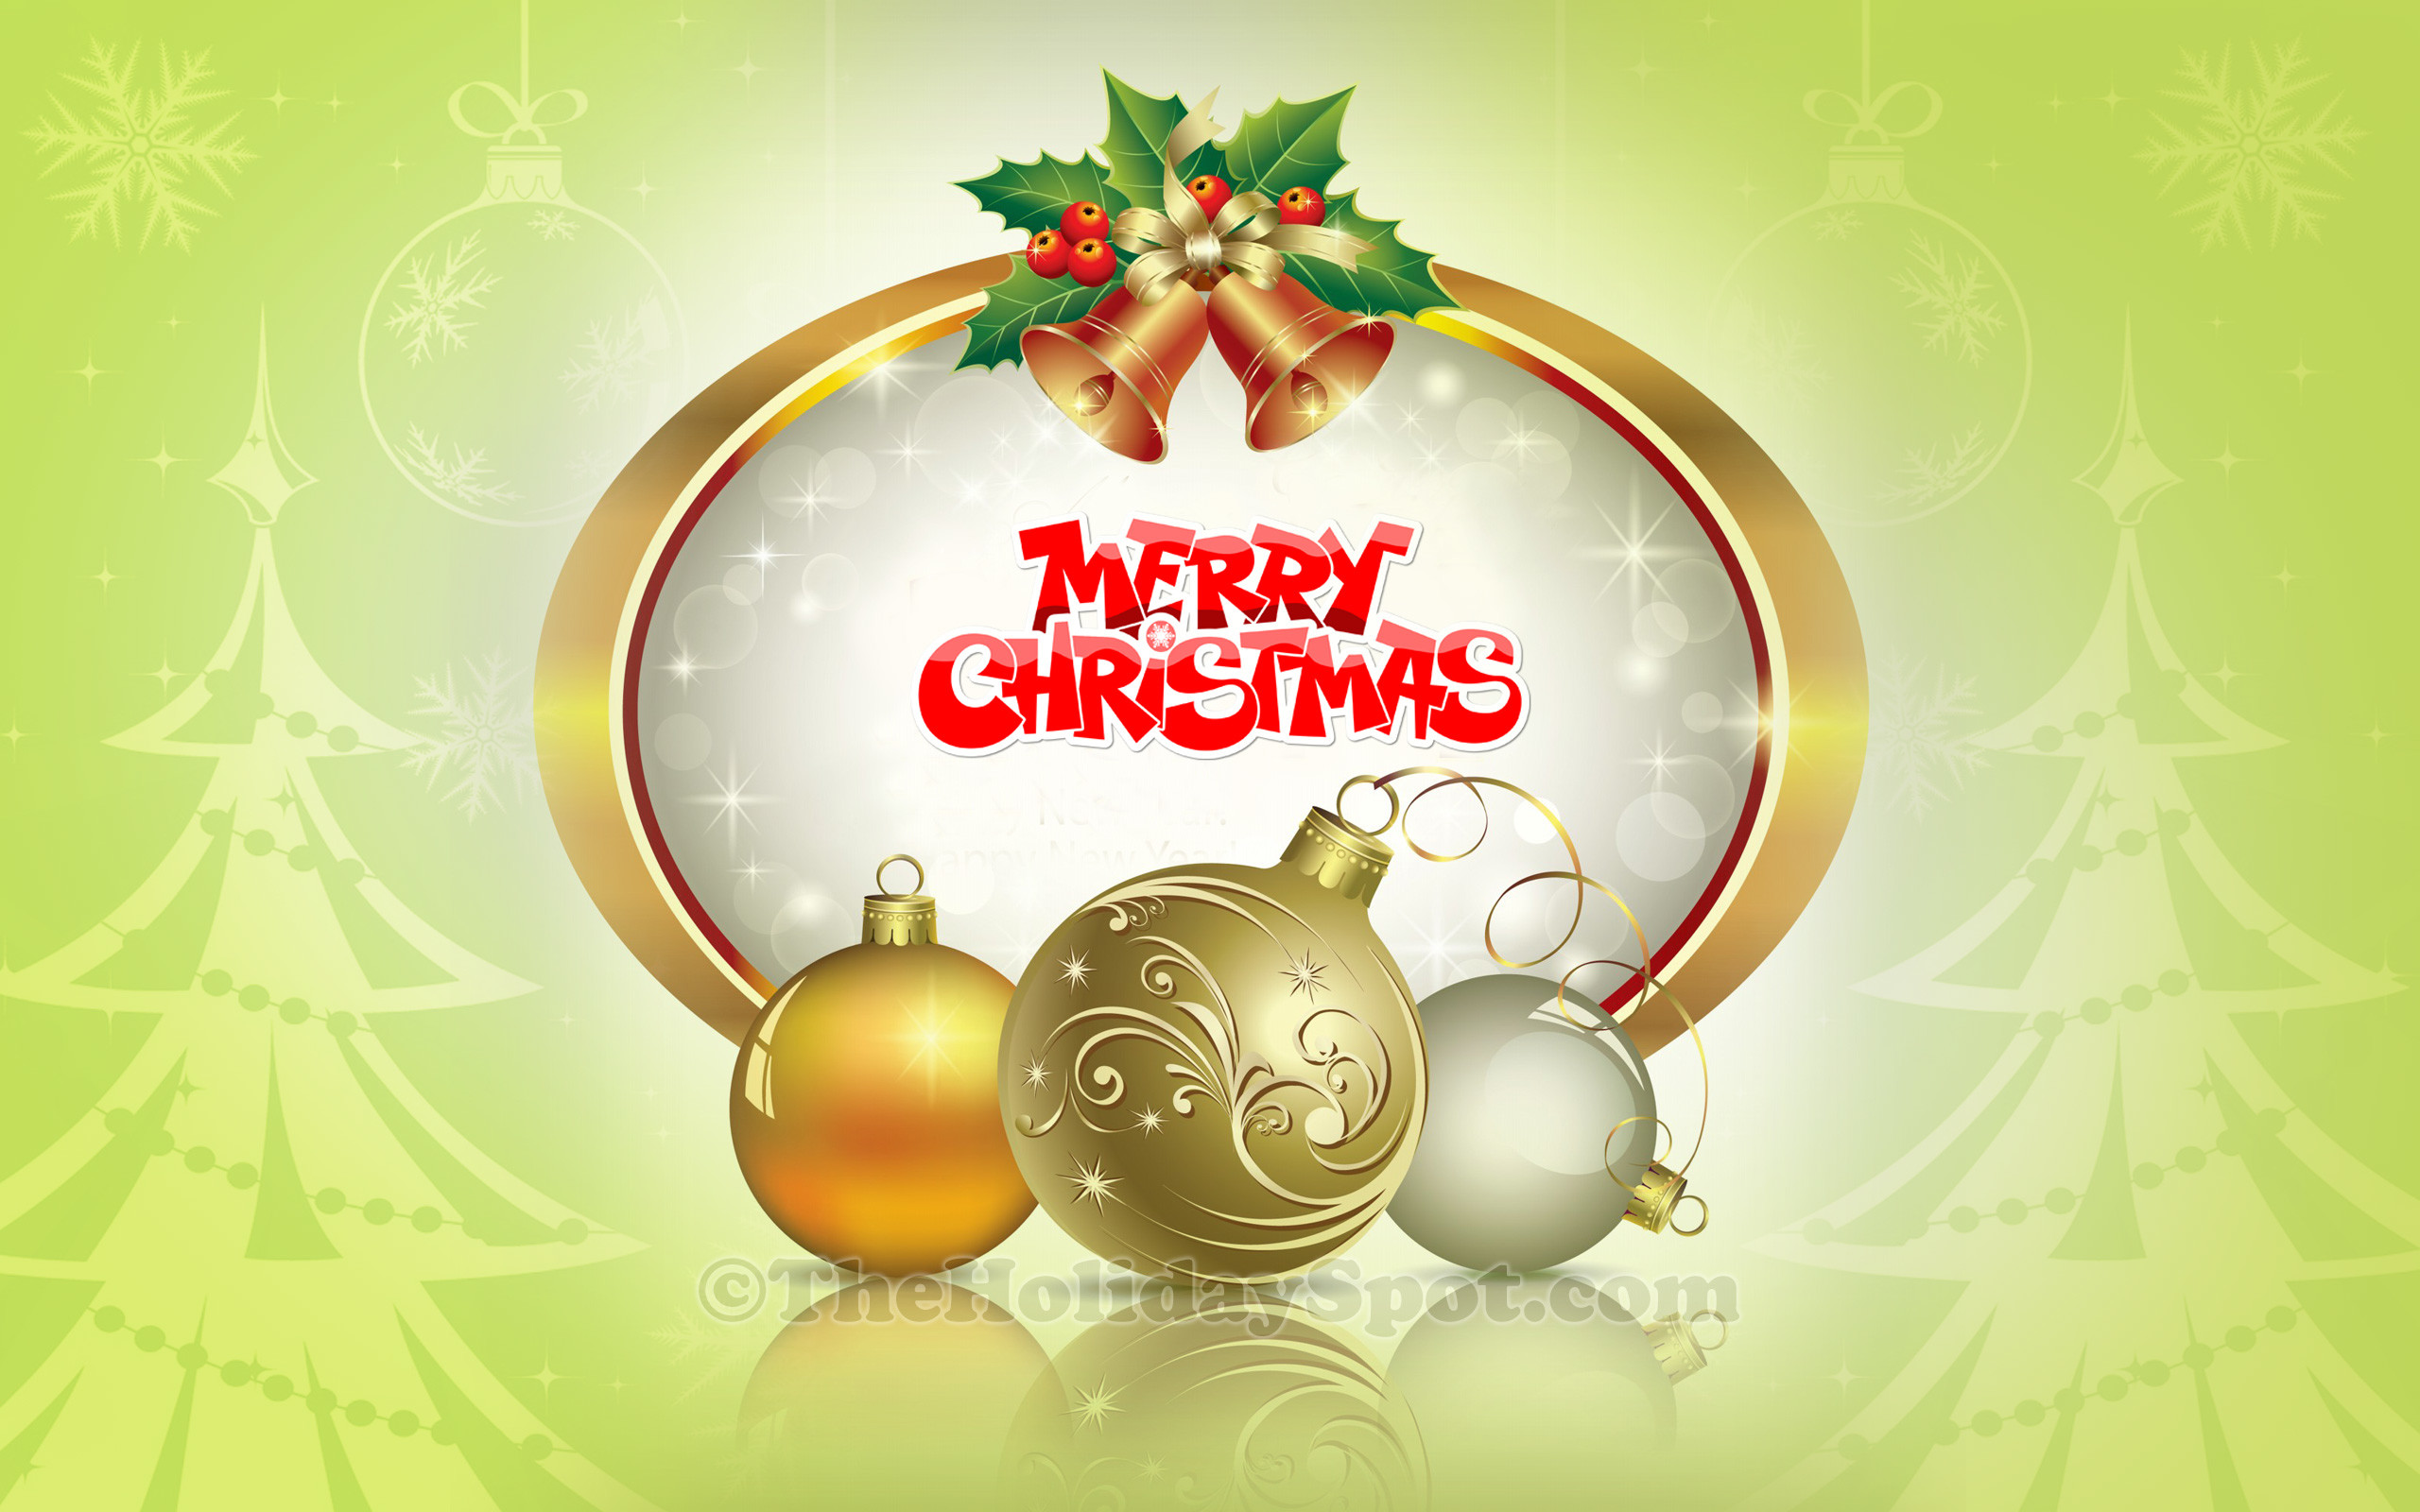 Wallpaper Merry Christmas wishes from Santa Download